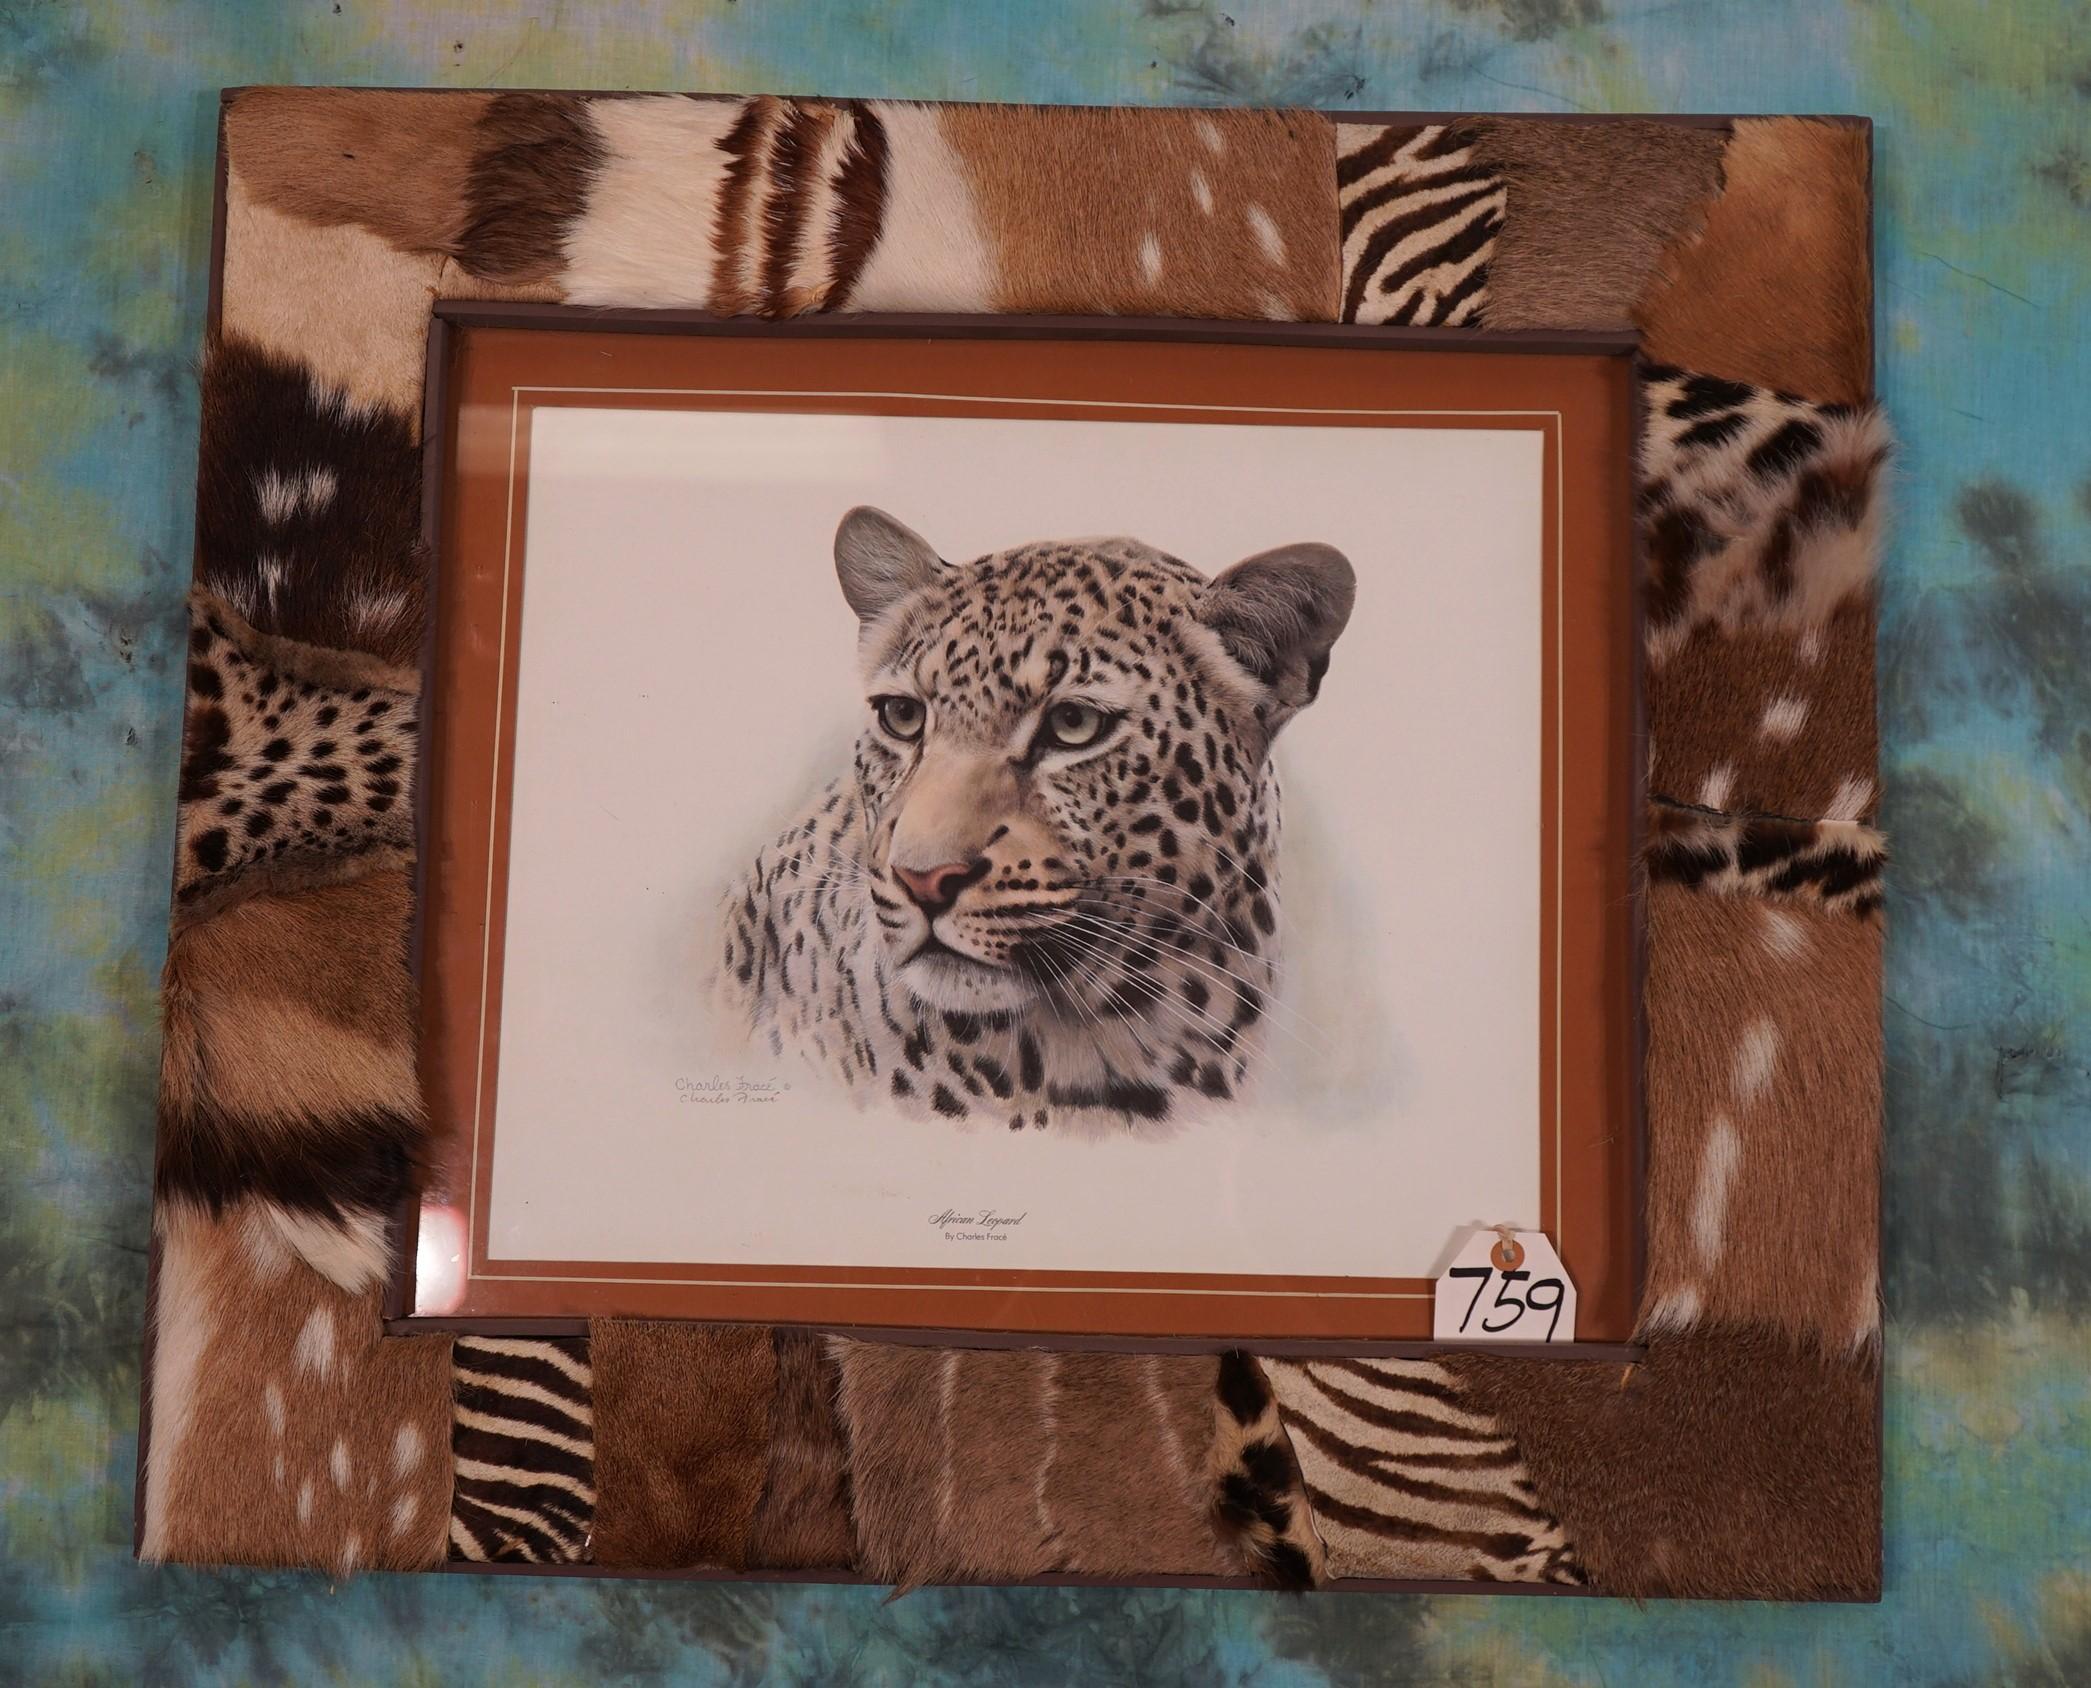 Gorgeous African Leopard Framed Print by Charles Frace'